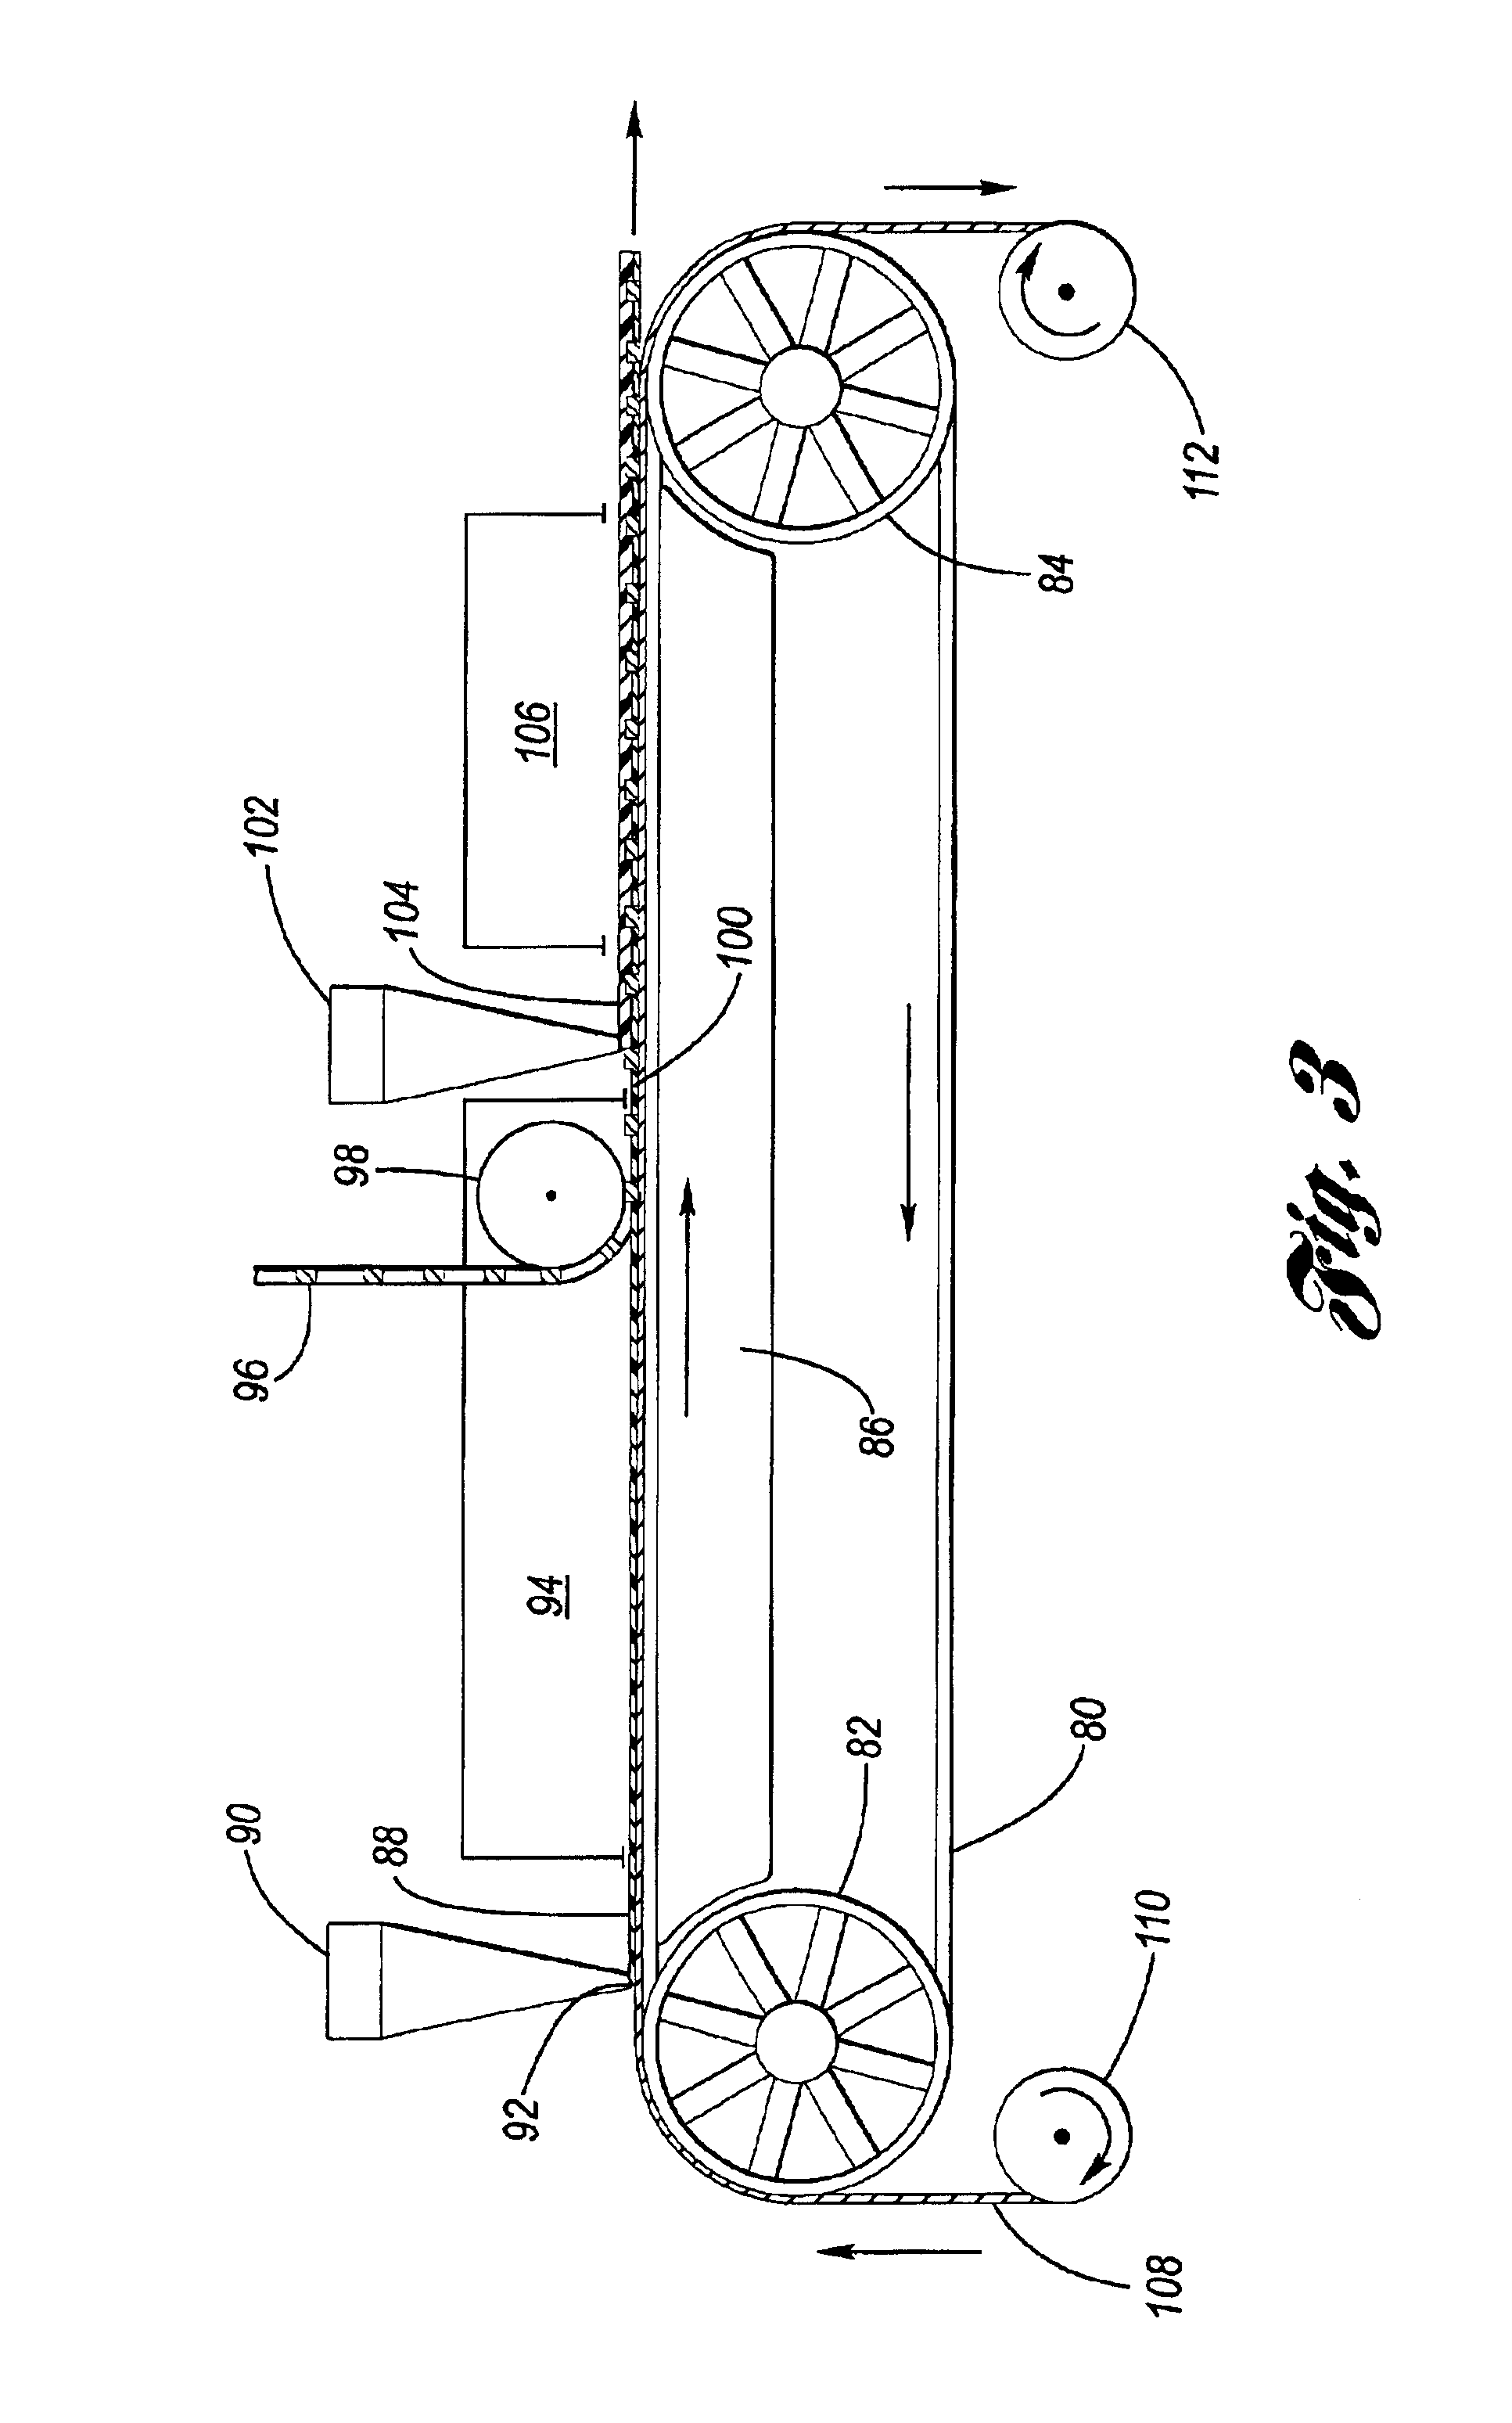 System and method for multilayer fabrication of lithium polymer batteries and cells